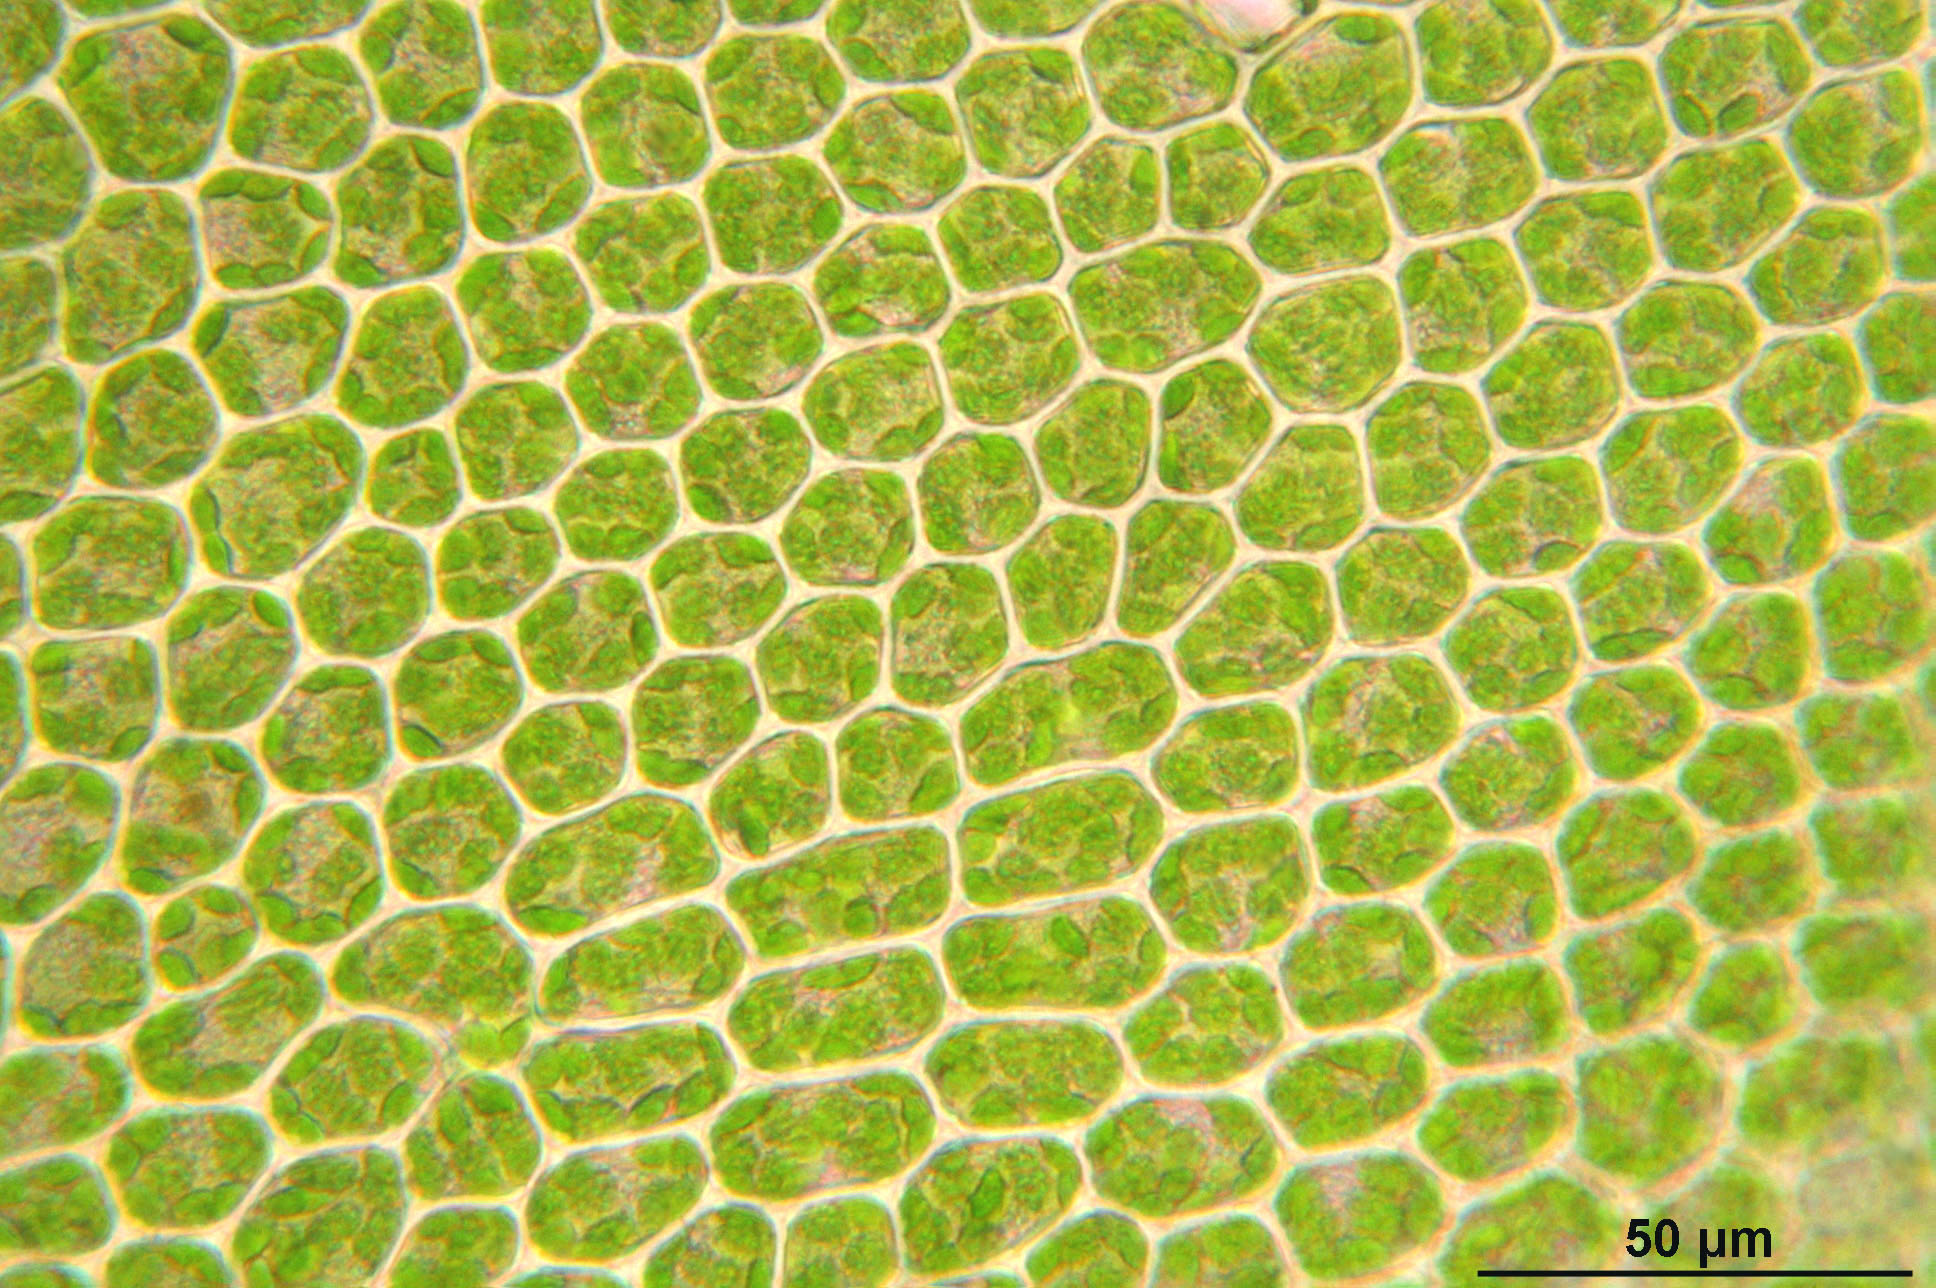 Light microscope image of plant cells. About 100 to 200 cells are visible. The cell walls appear pale coloured, whereas the cells are packed full of bright green chloroplasts. The chloroplasts look like small sacks within the cells.